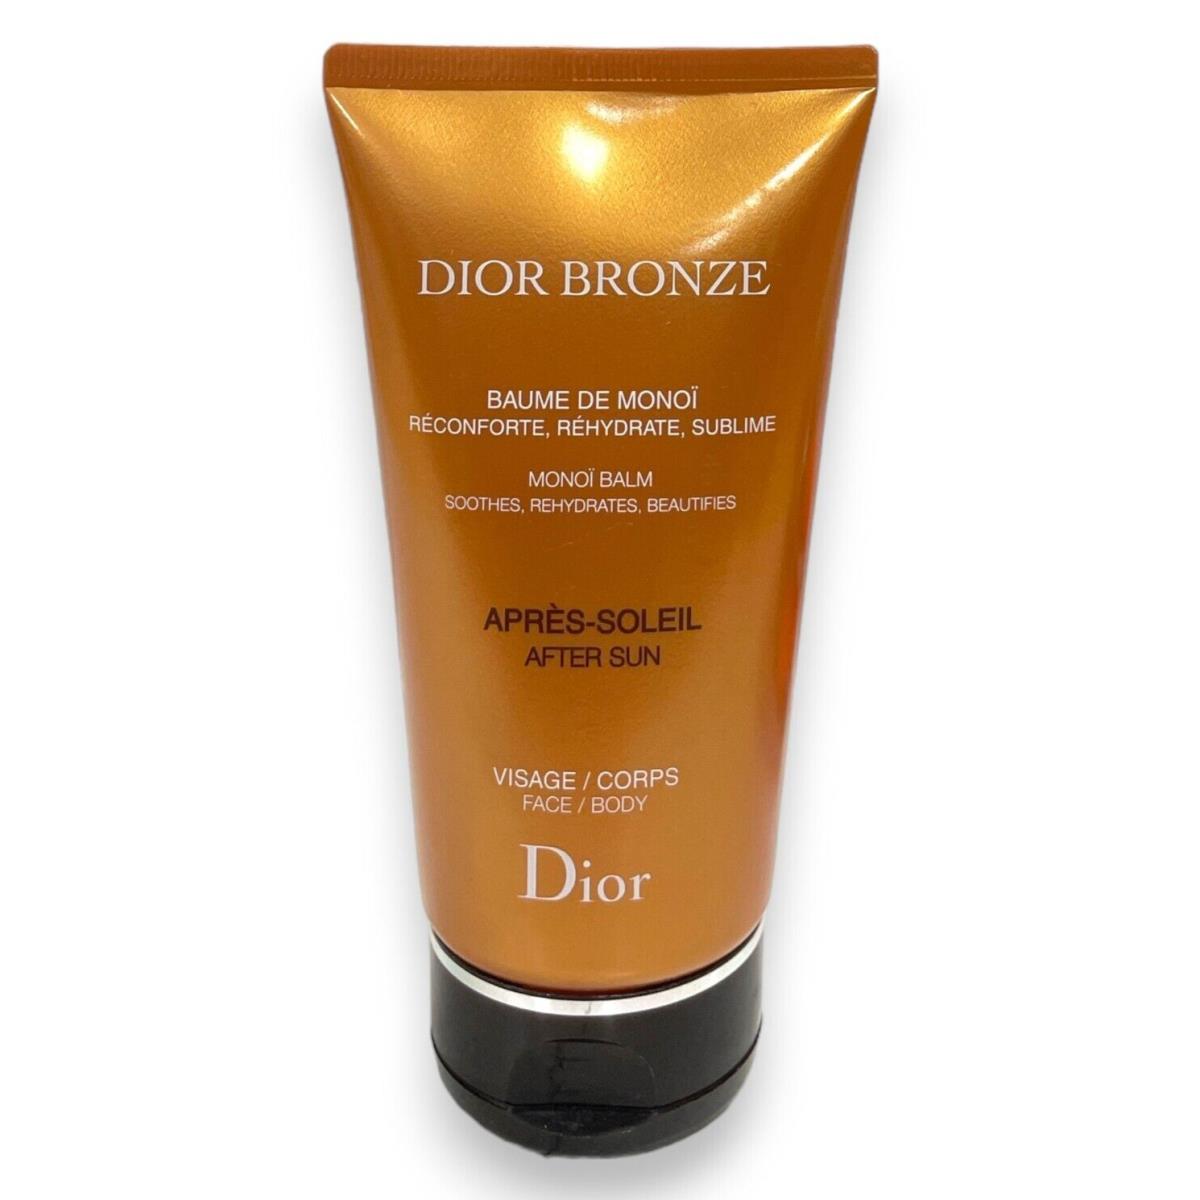 Dior Bronze After Sun Face Body 150ml/5.2oz As Seen In Pics